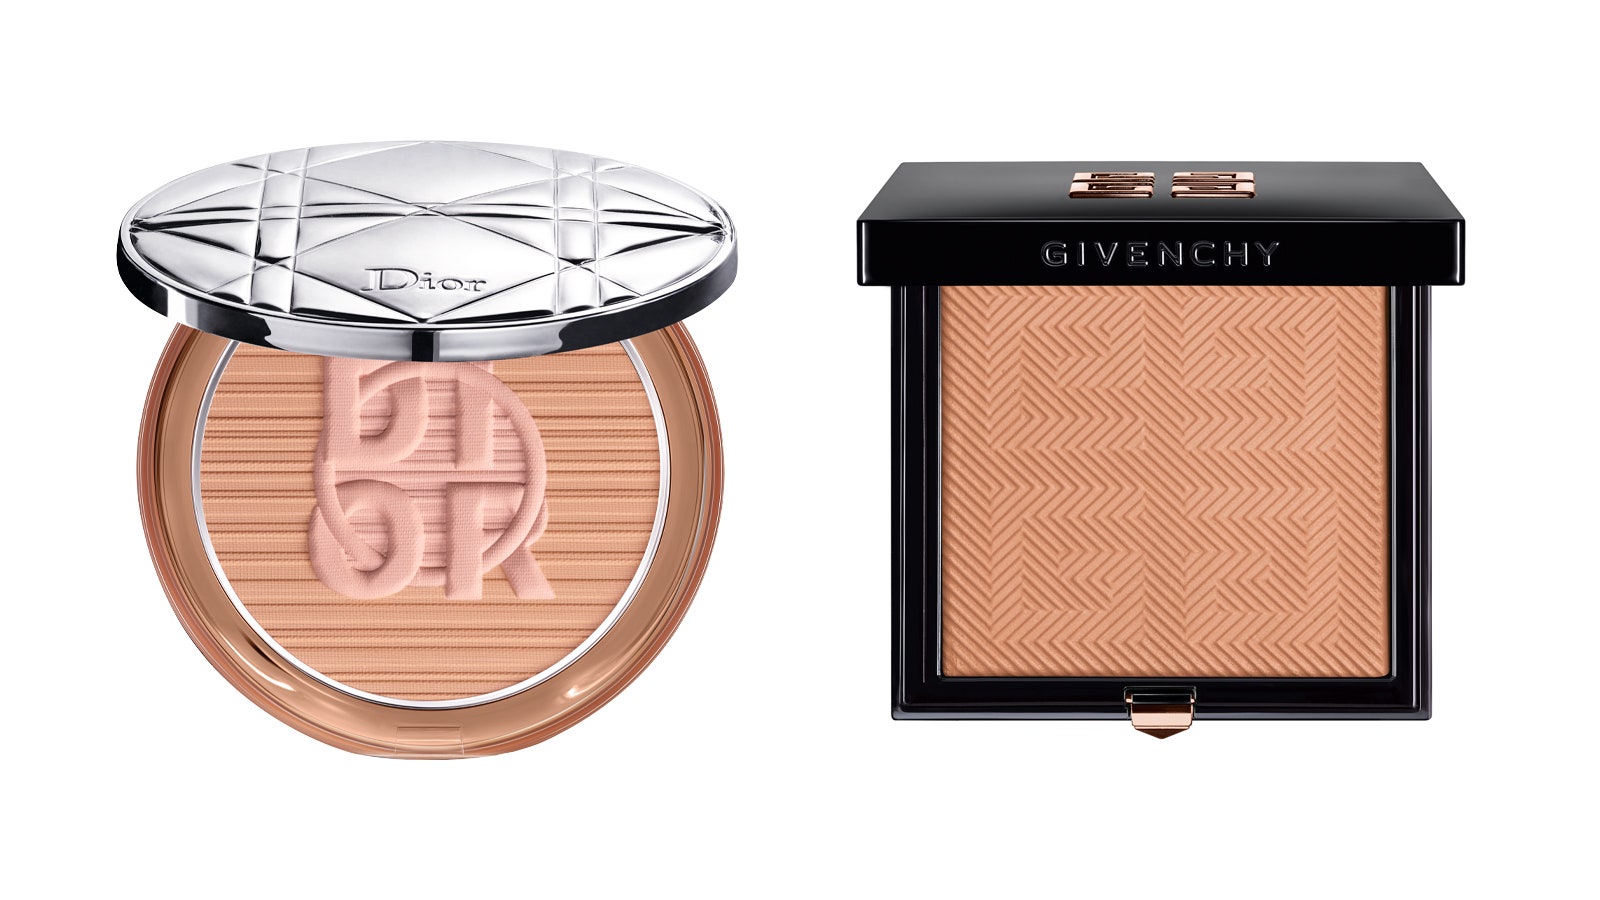 Diorskin Nude Mineral Bronze Color Games Givenchy Summer Haze Healthy Glow Powder